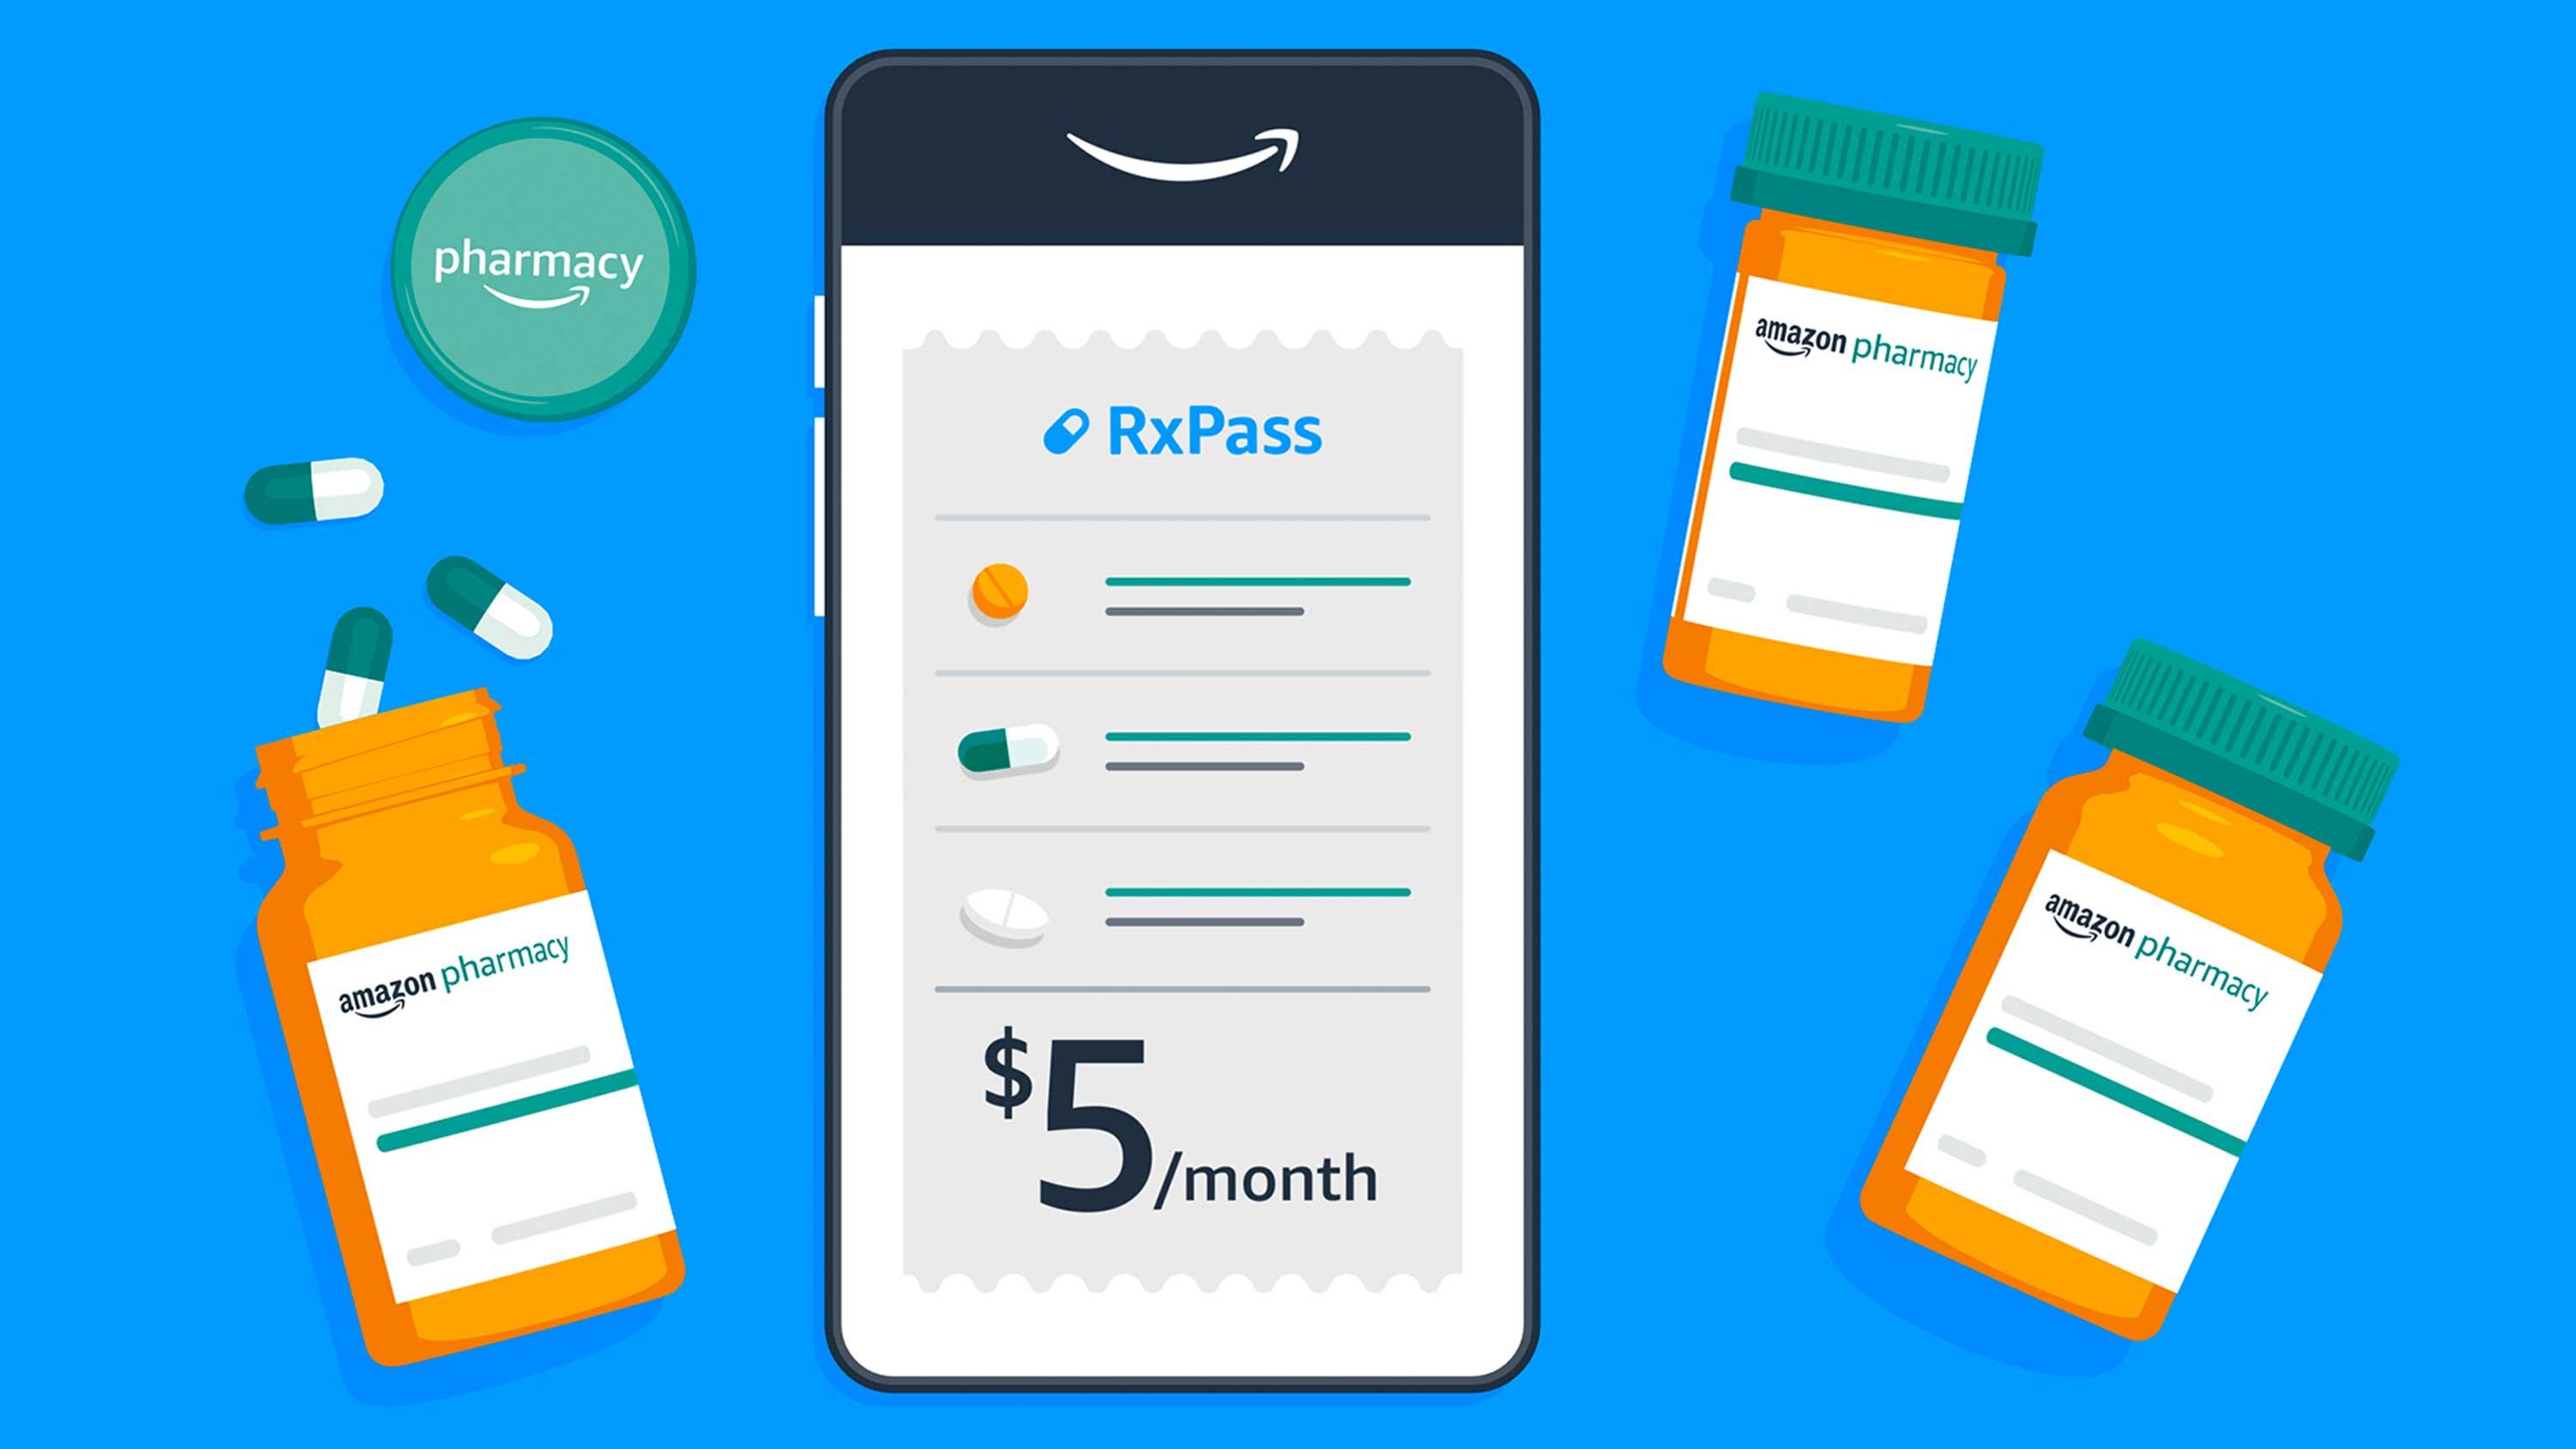 Amazon Prime members can use Amazon's RxPass